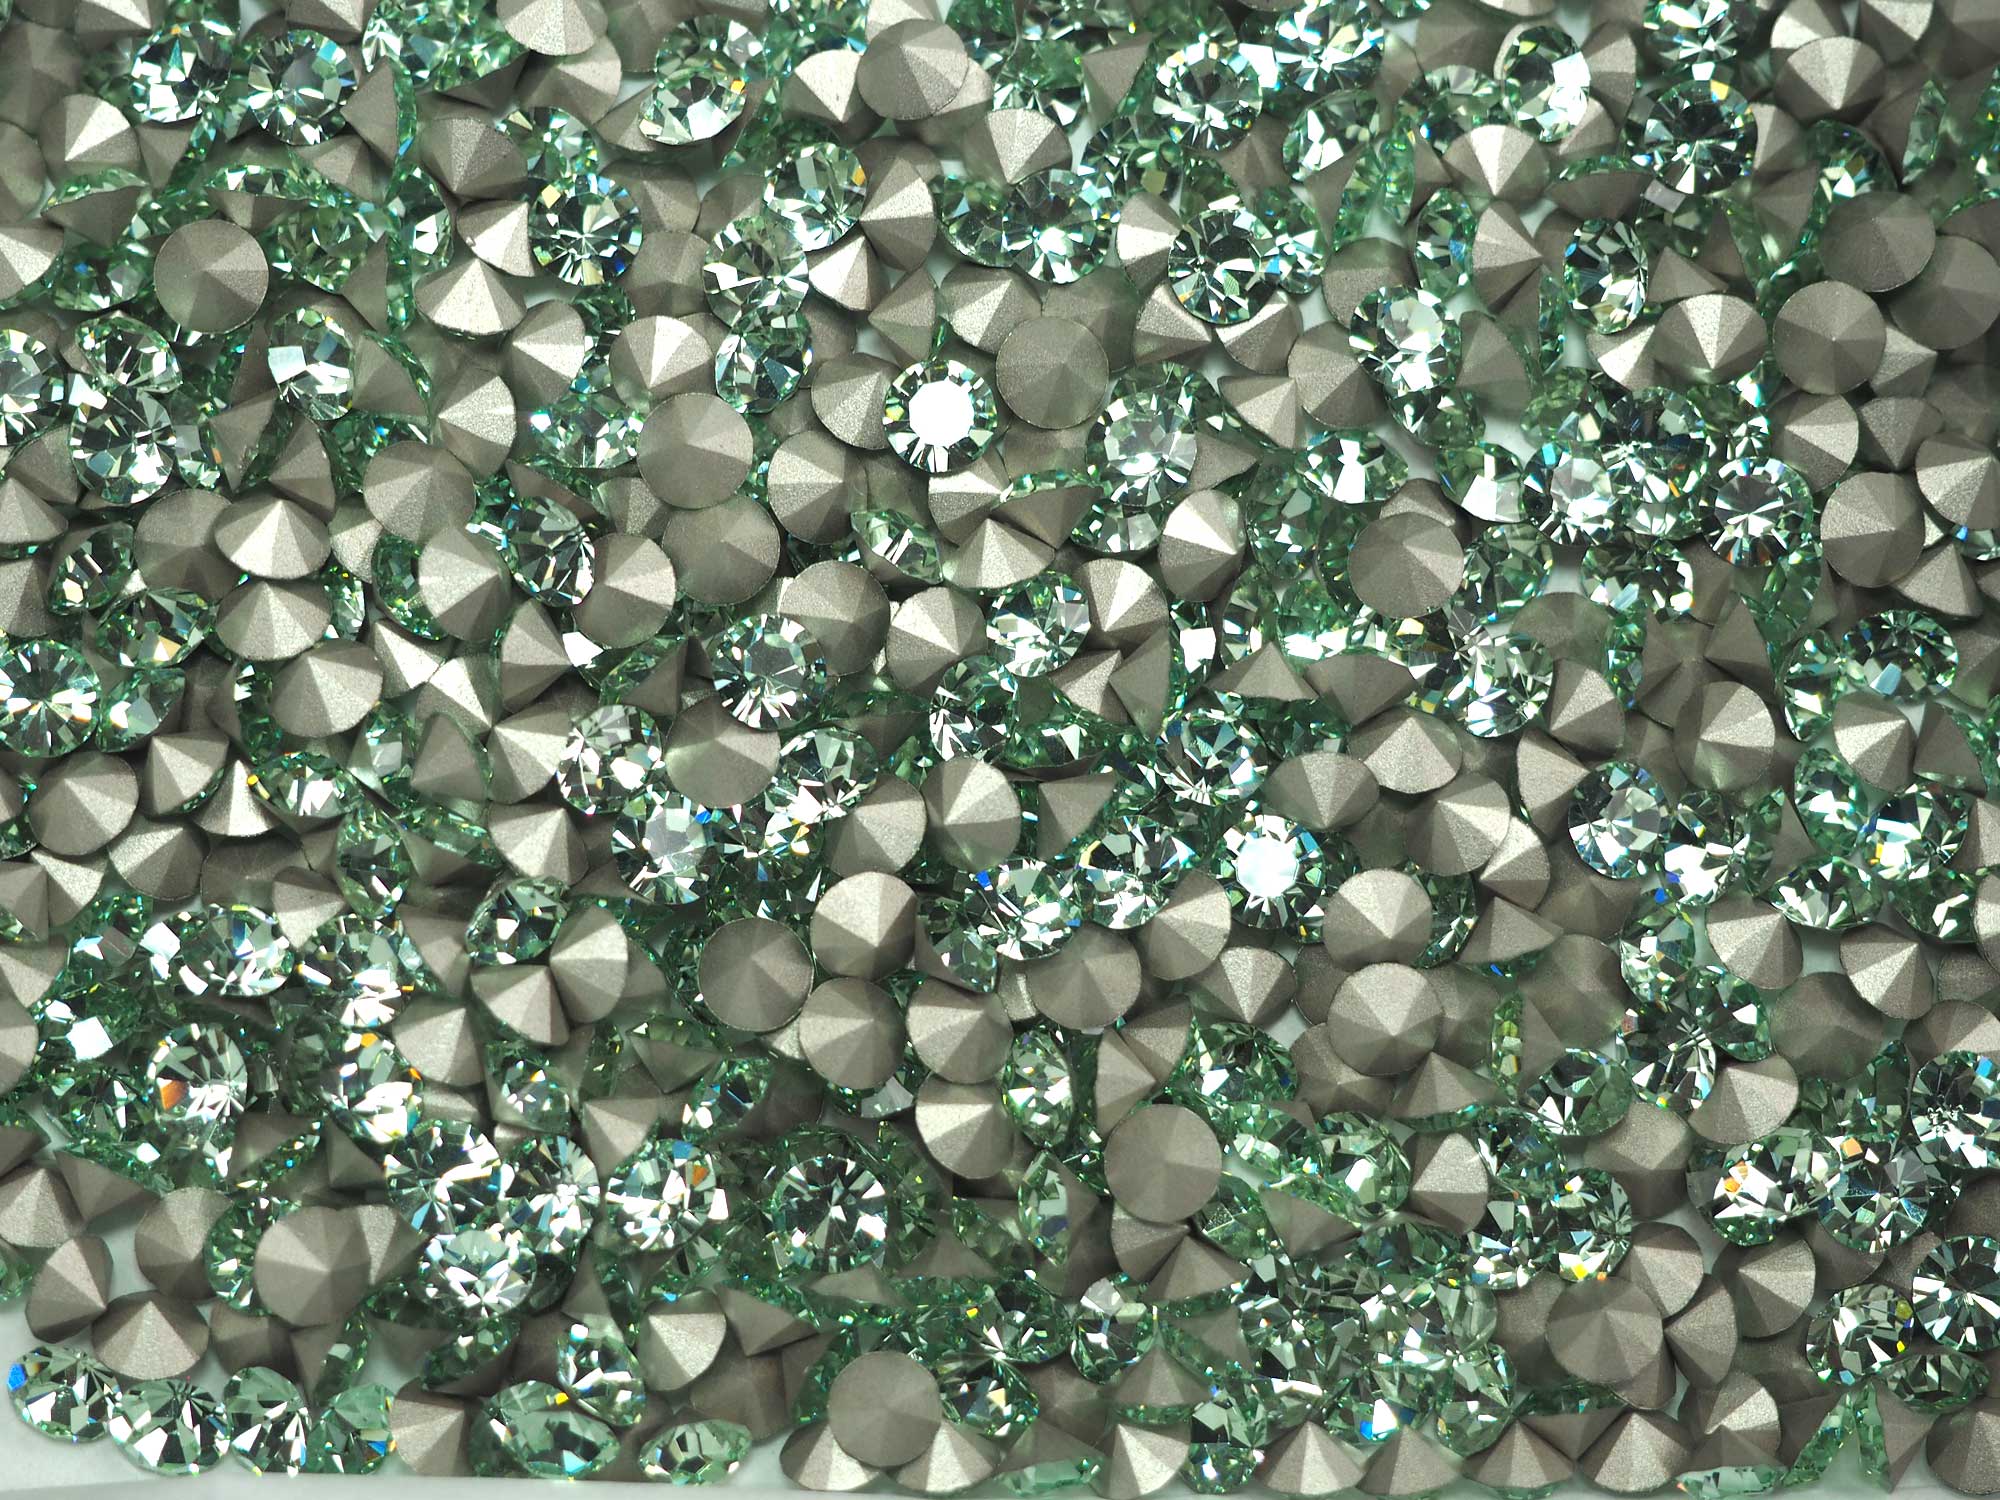 Chrysolite, Preciosa Genuine Czech MAXIMA Pointed Back Chatons in size ss28 (6mm, 0.24inch), 36 pieces, Silver Foiled, P630